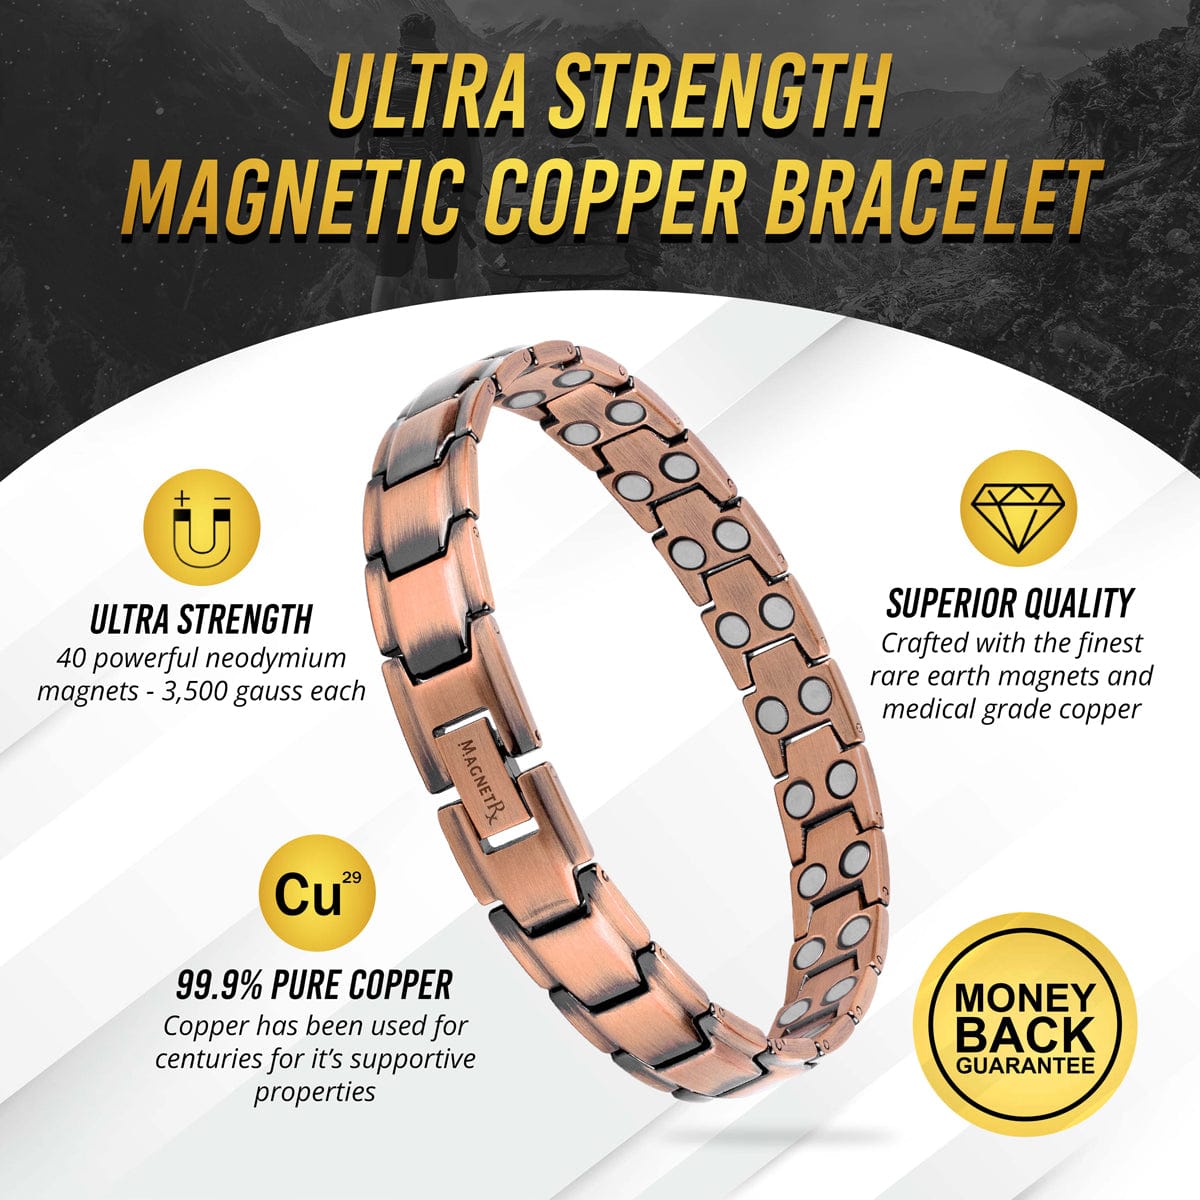 The health benefits of Copper Bracelets